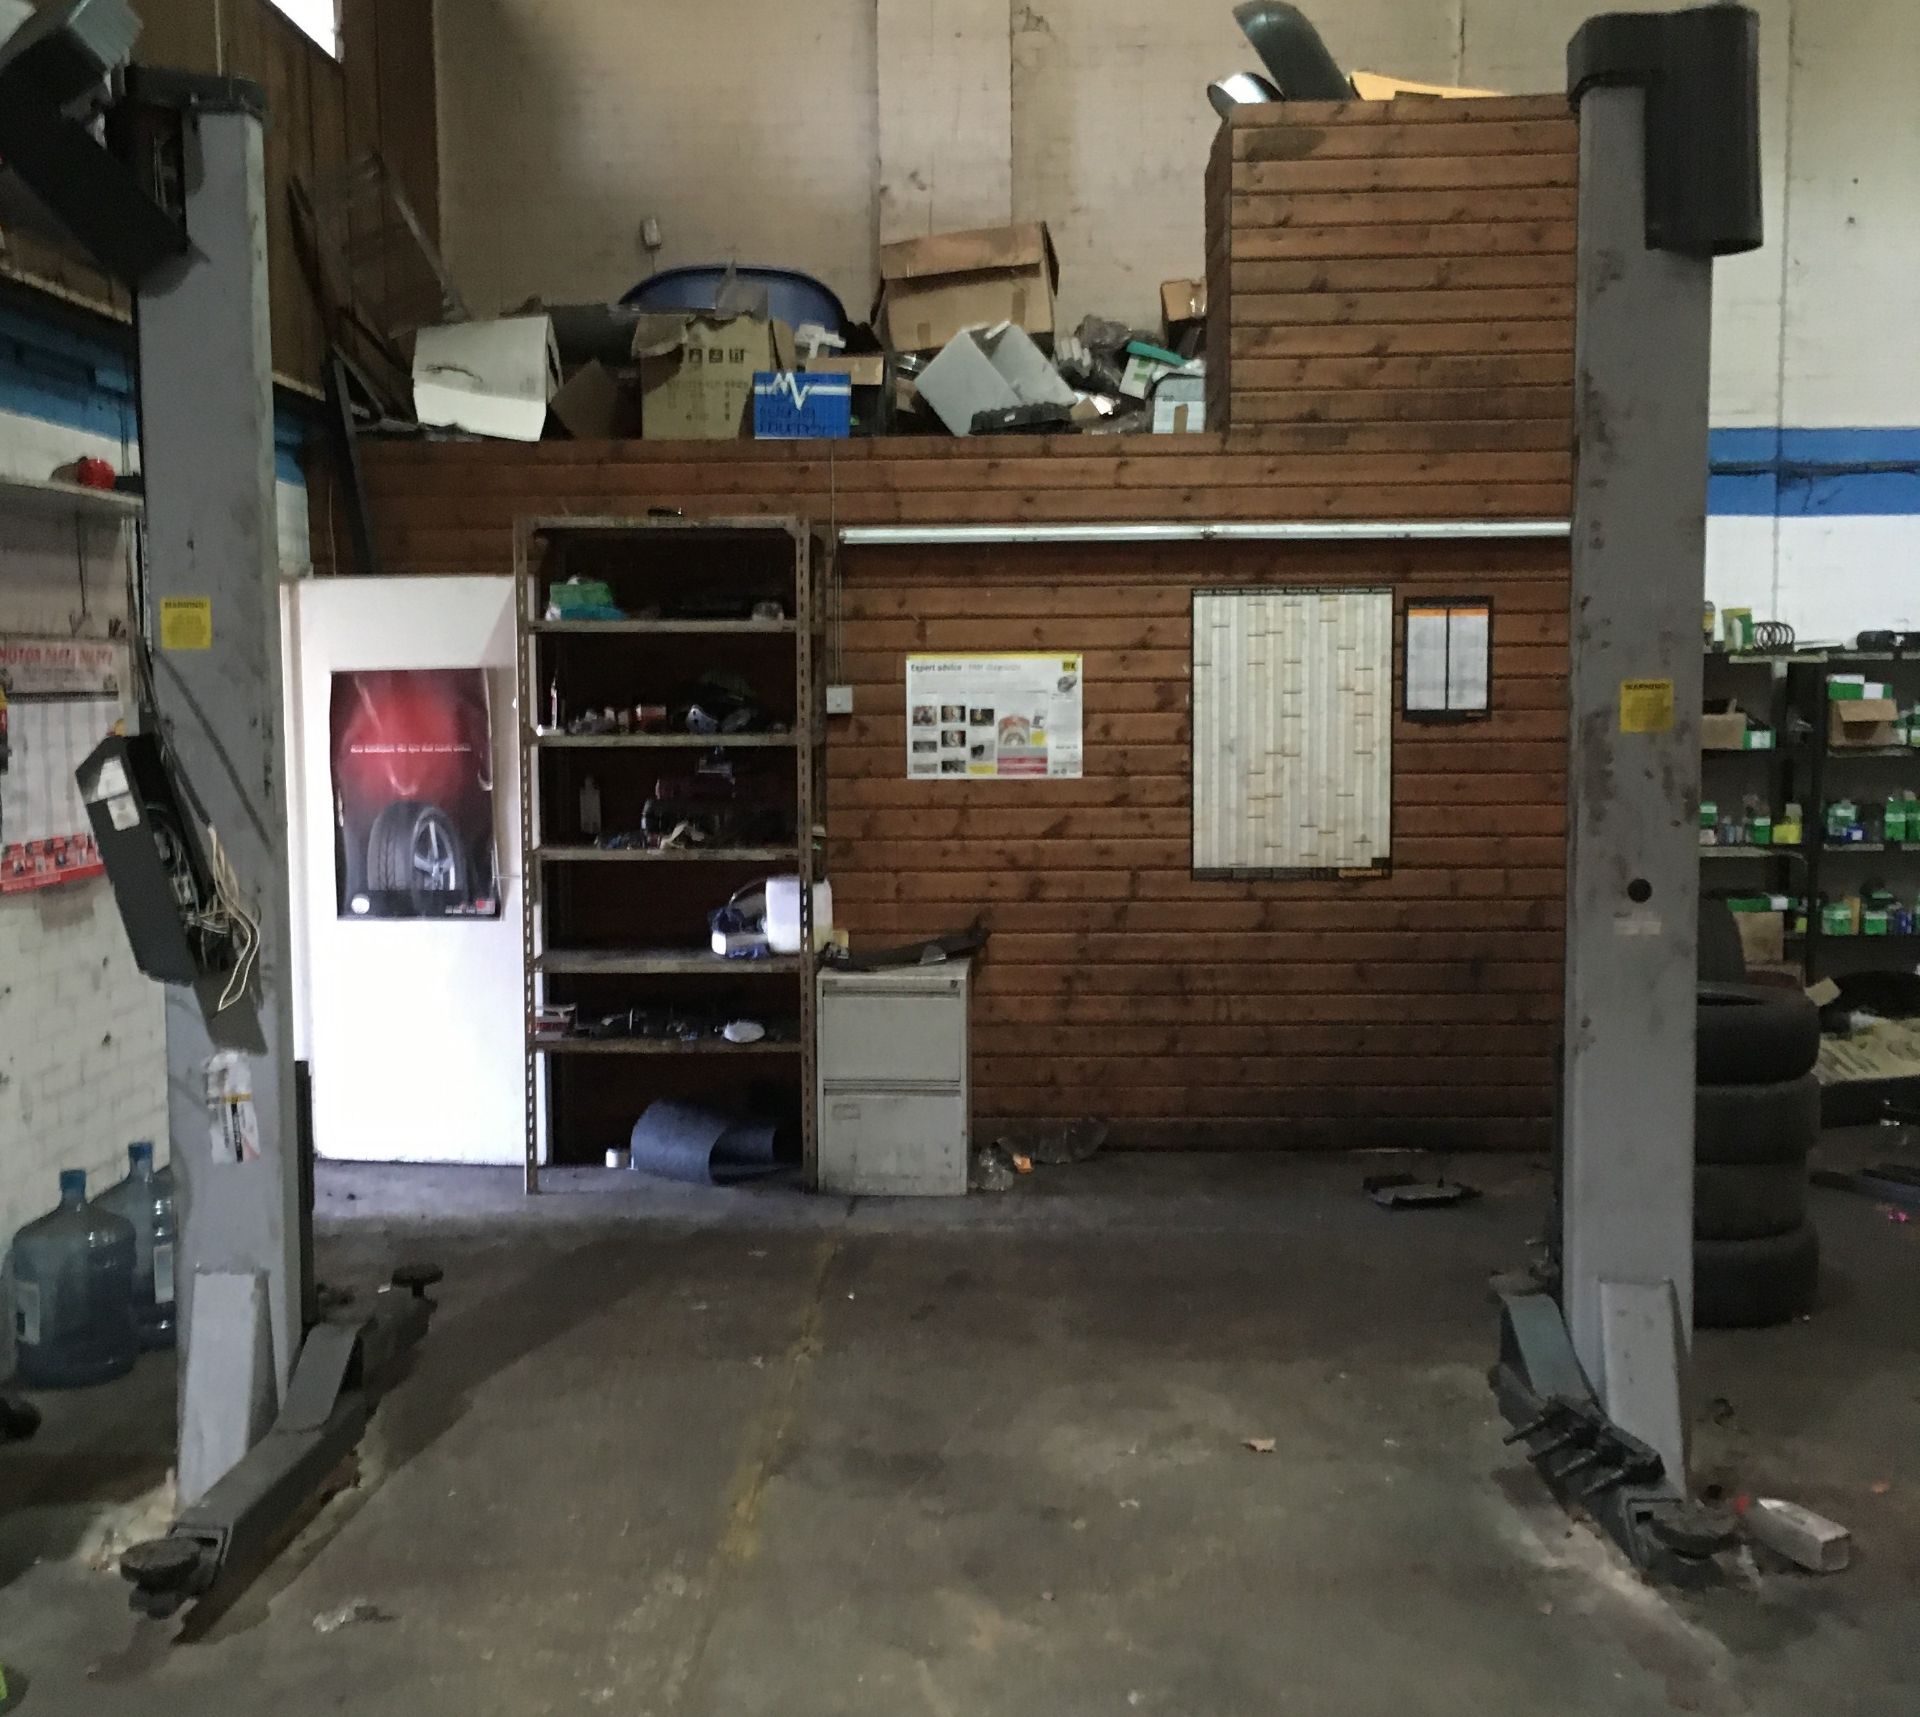 * SLIFT Classic 3 Ton 2 Post Vehicle Lift 3PH (spares or repairs). Please note there is £10 plus VAT